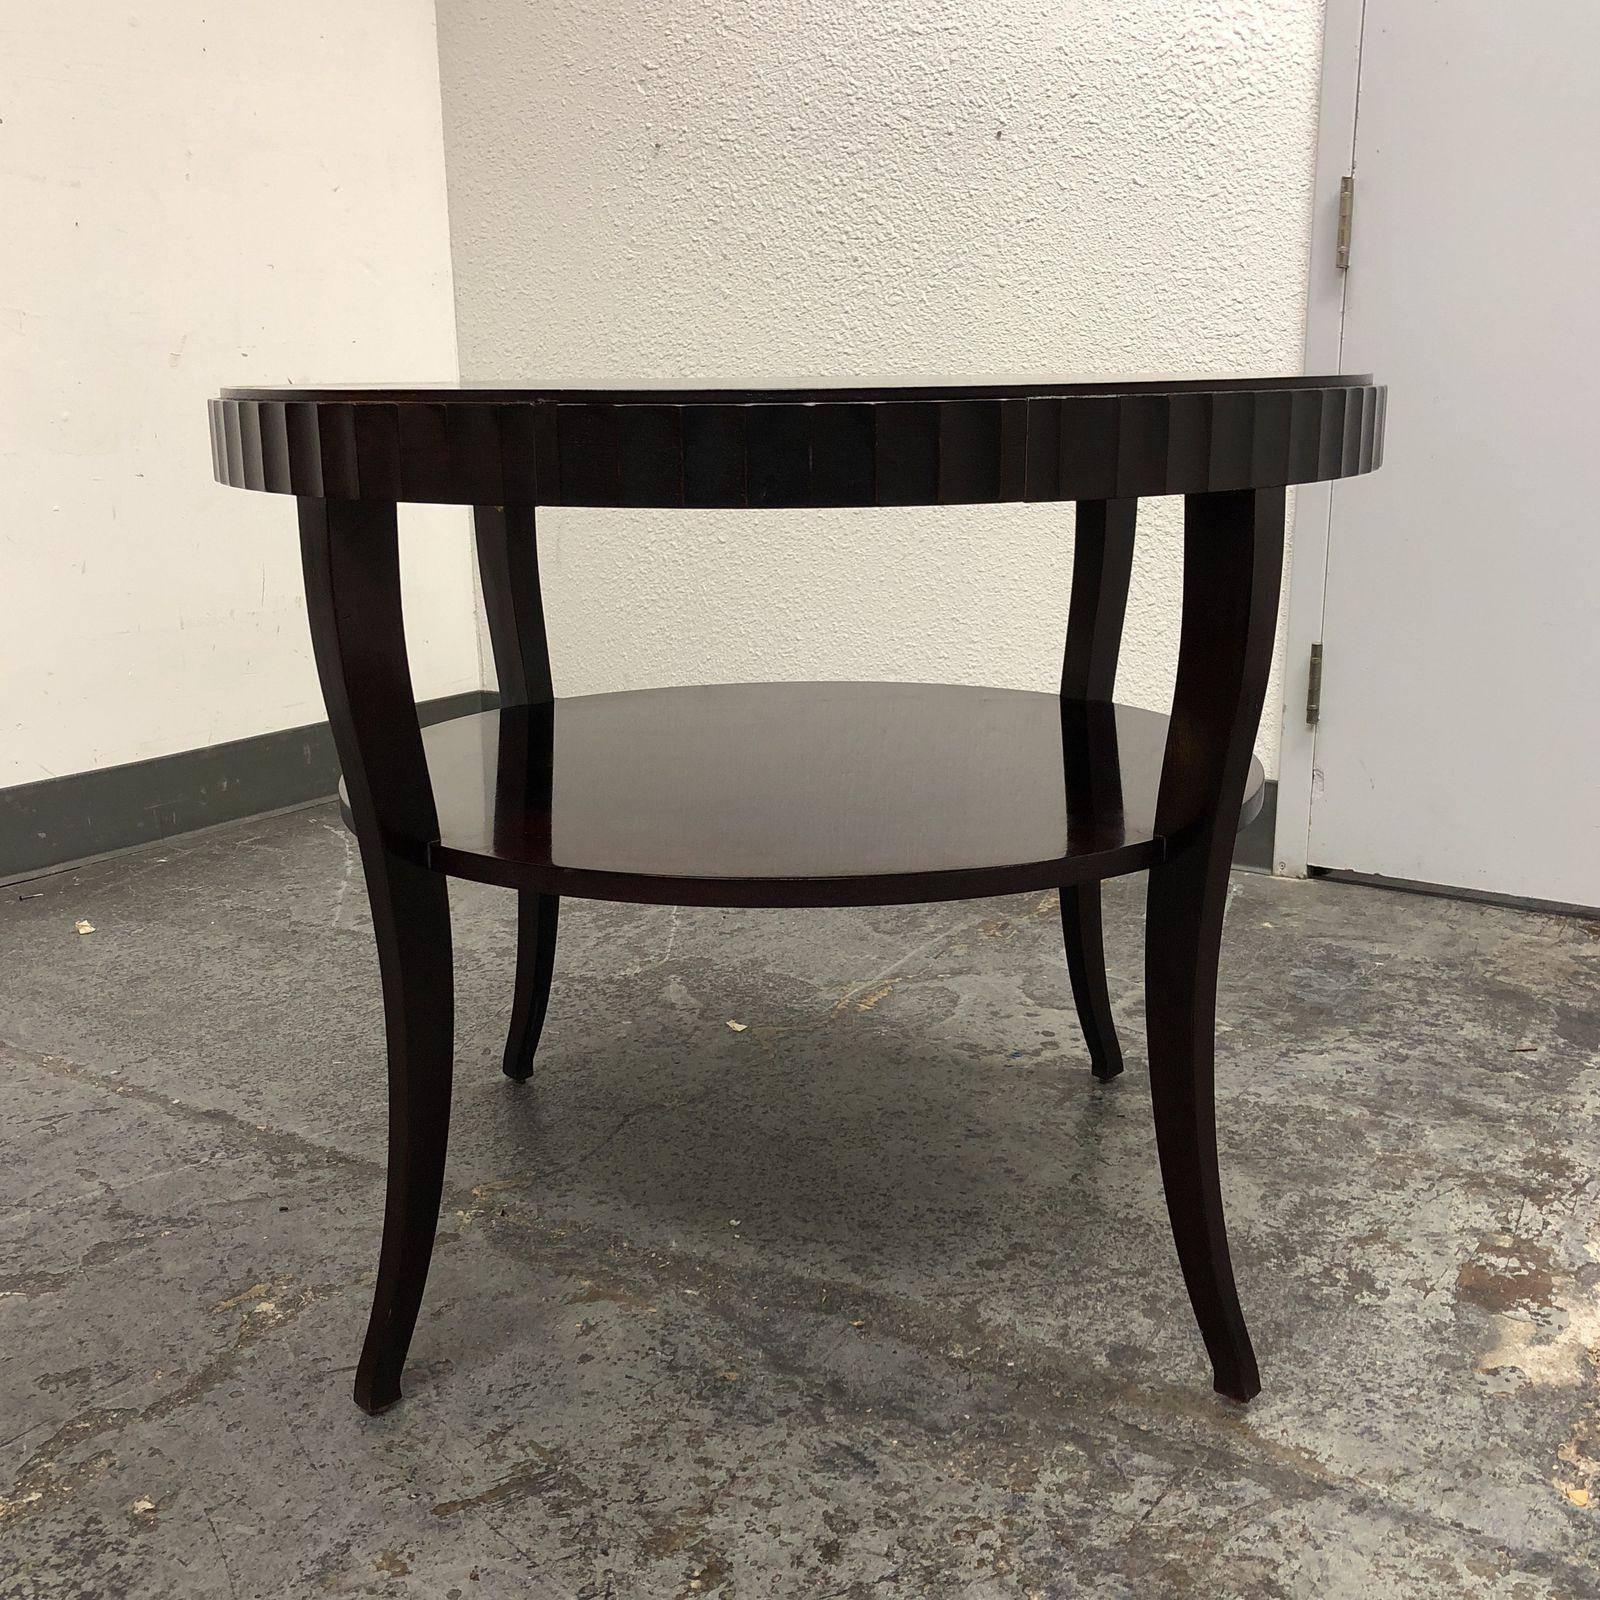 Baker Furniture Barbara Barry Side or Entry Table In Good Condition For Sale In San Francisco, CA